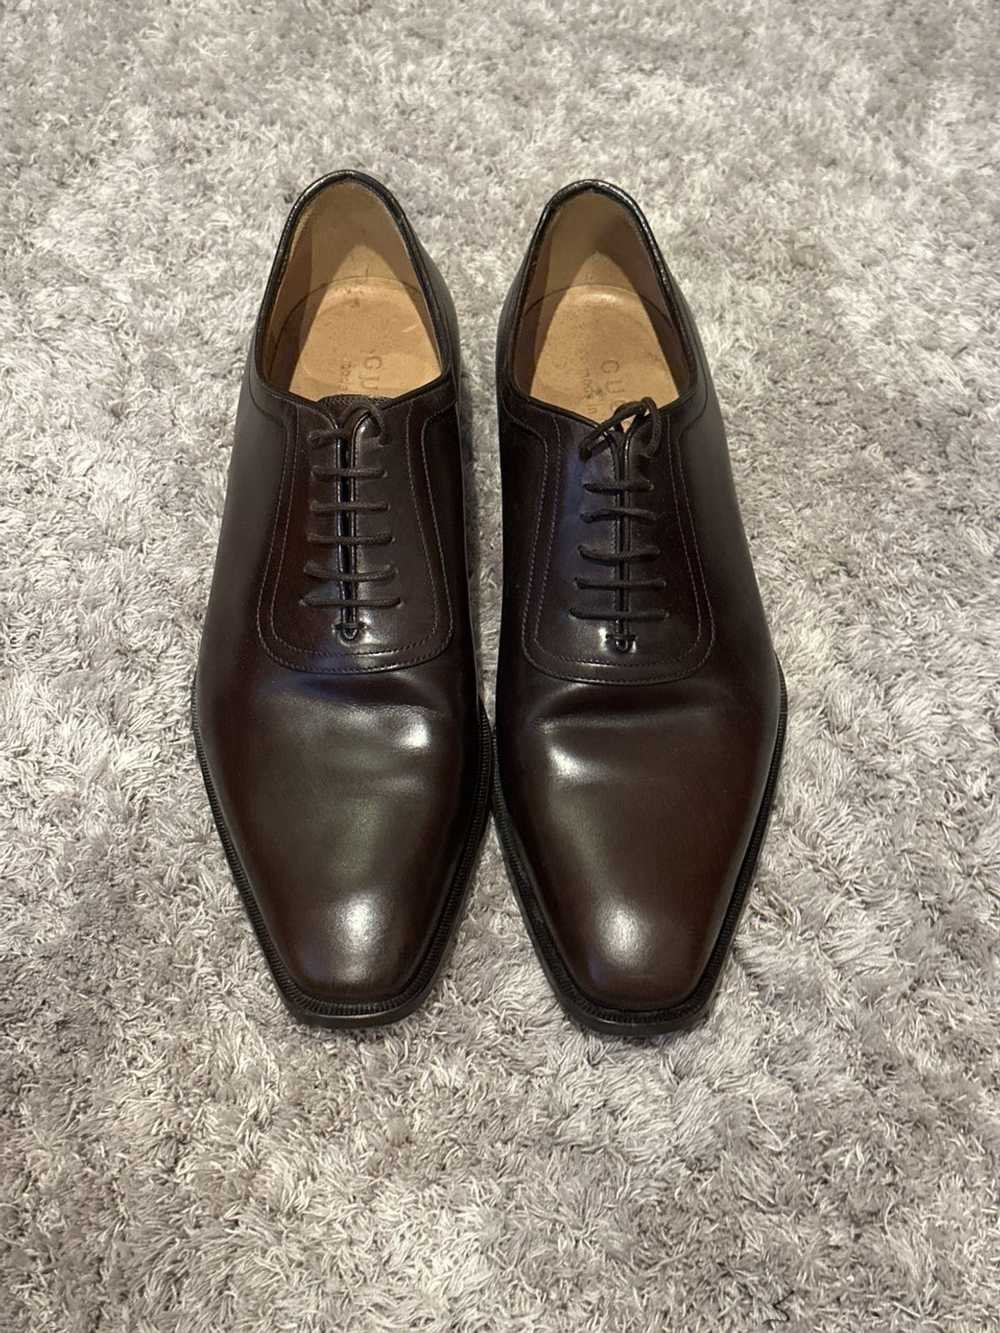 Gucci Gucci Oxford Dress Shoe Brown Leather - image 5